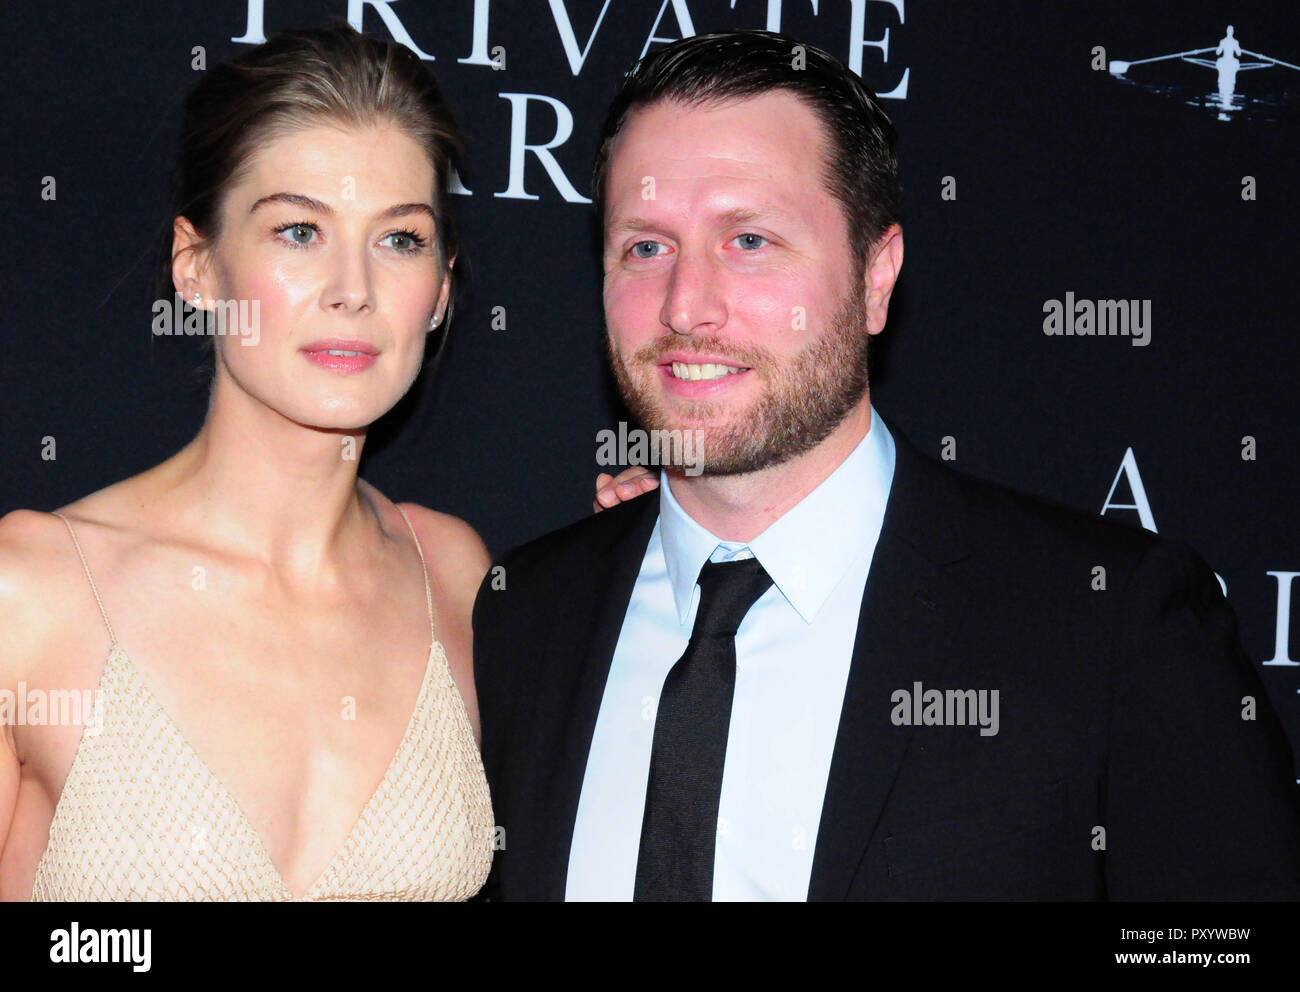 Beverly Hills, California, USA. 24th October, 2018. Actress Rosamund Pike and director Matthew Heineman attend the Los Angeles Premiere of Aviron Pictures' 'A Private War' at Samuel Goldwyn Theater in Beverly Hills, California. Photo by Barry King/Alamy Live News Stock Photo